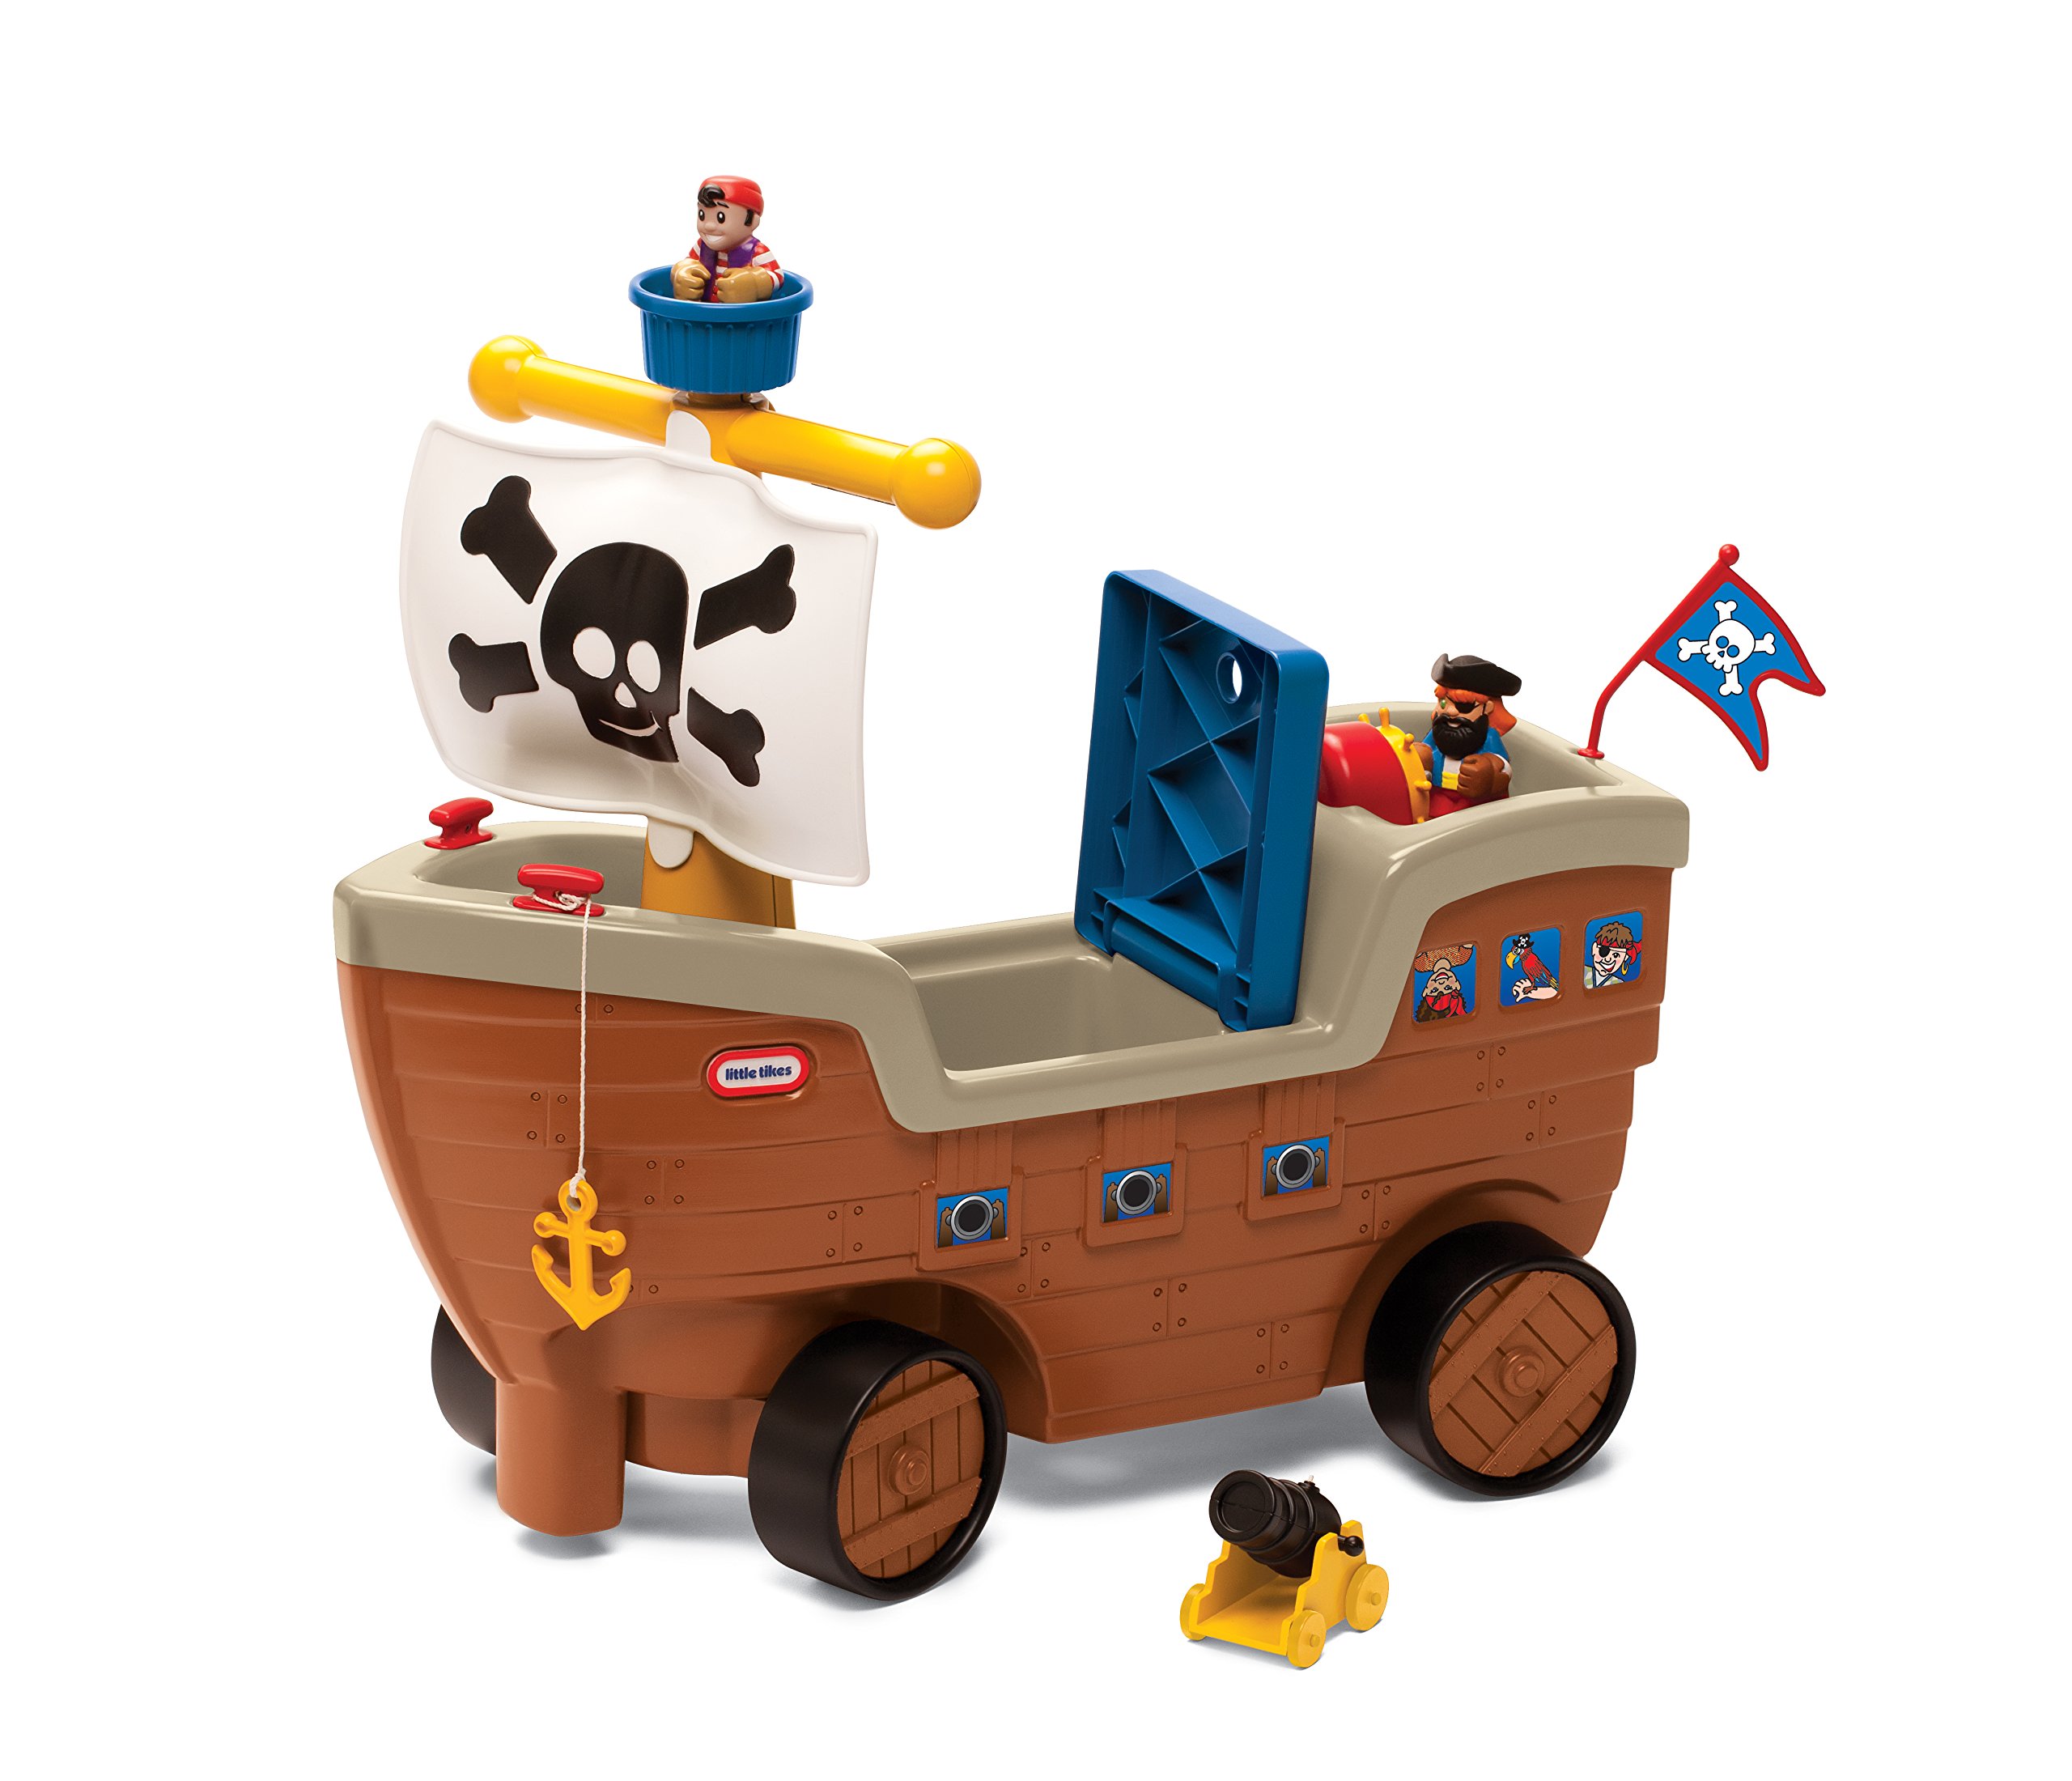 Little Tikes 2-in-1 Pirate Ship Toy - Kids Ride-On Boat with Wheels, Under Seat Storage and Playset with Figures - Interactive Ride on Toys for 1 year olds and above, Multicolor